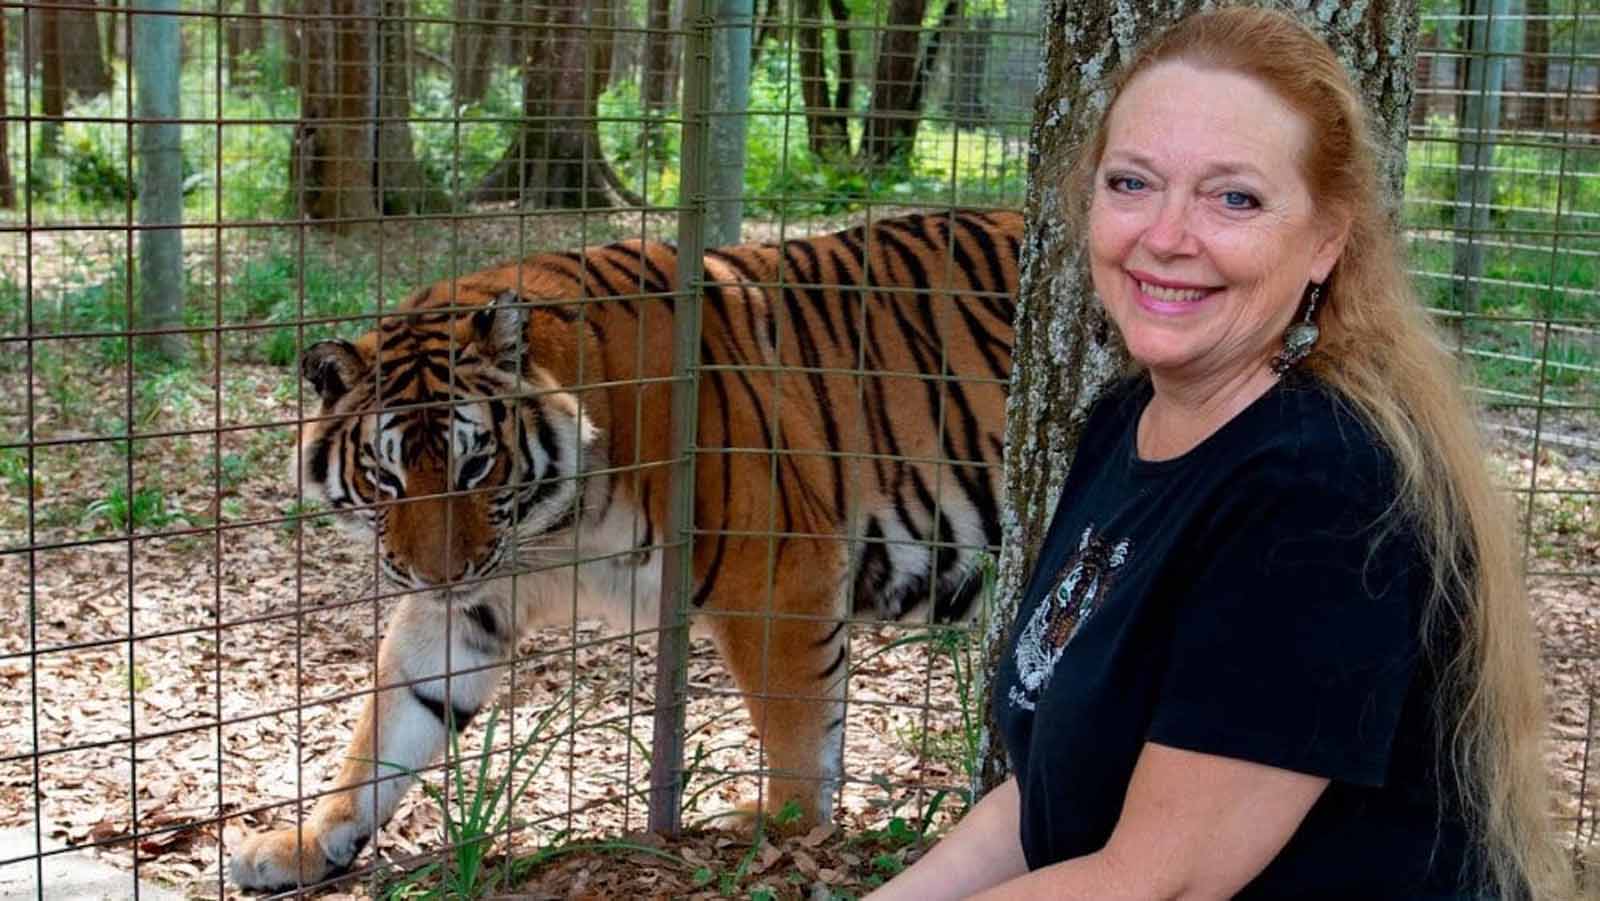 Carole Baskin and BCR are finally getting their goal: Joe Exotic's zoo. Here's everything you need to know about the court ruling.